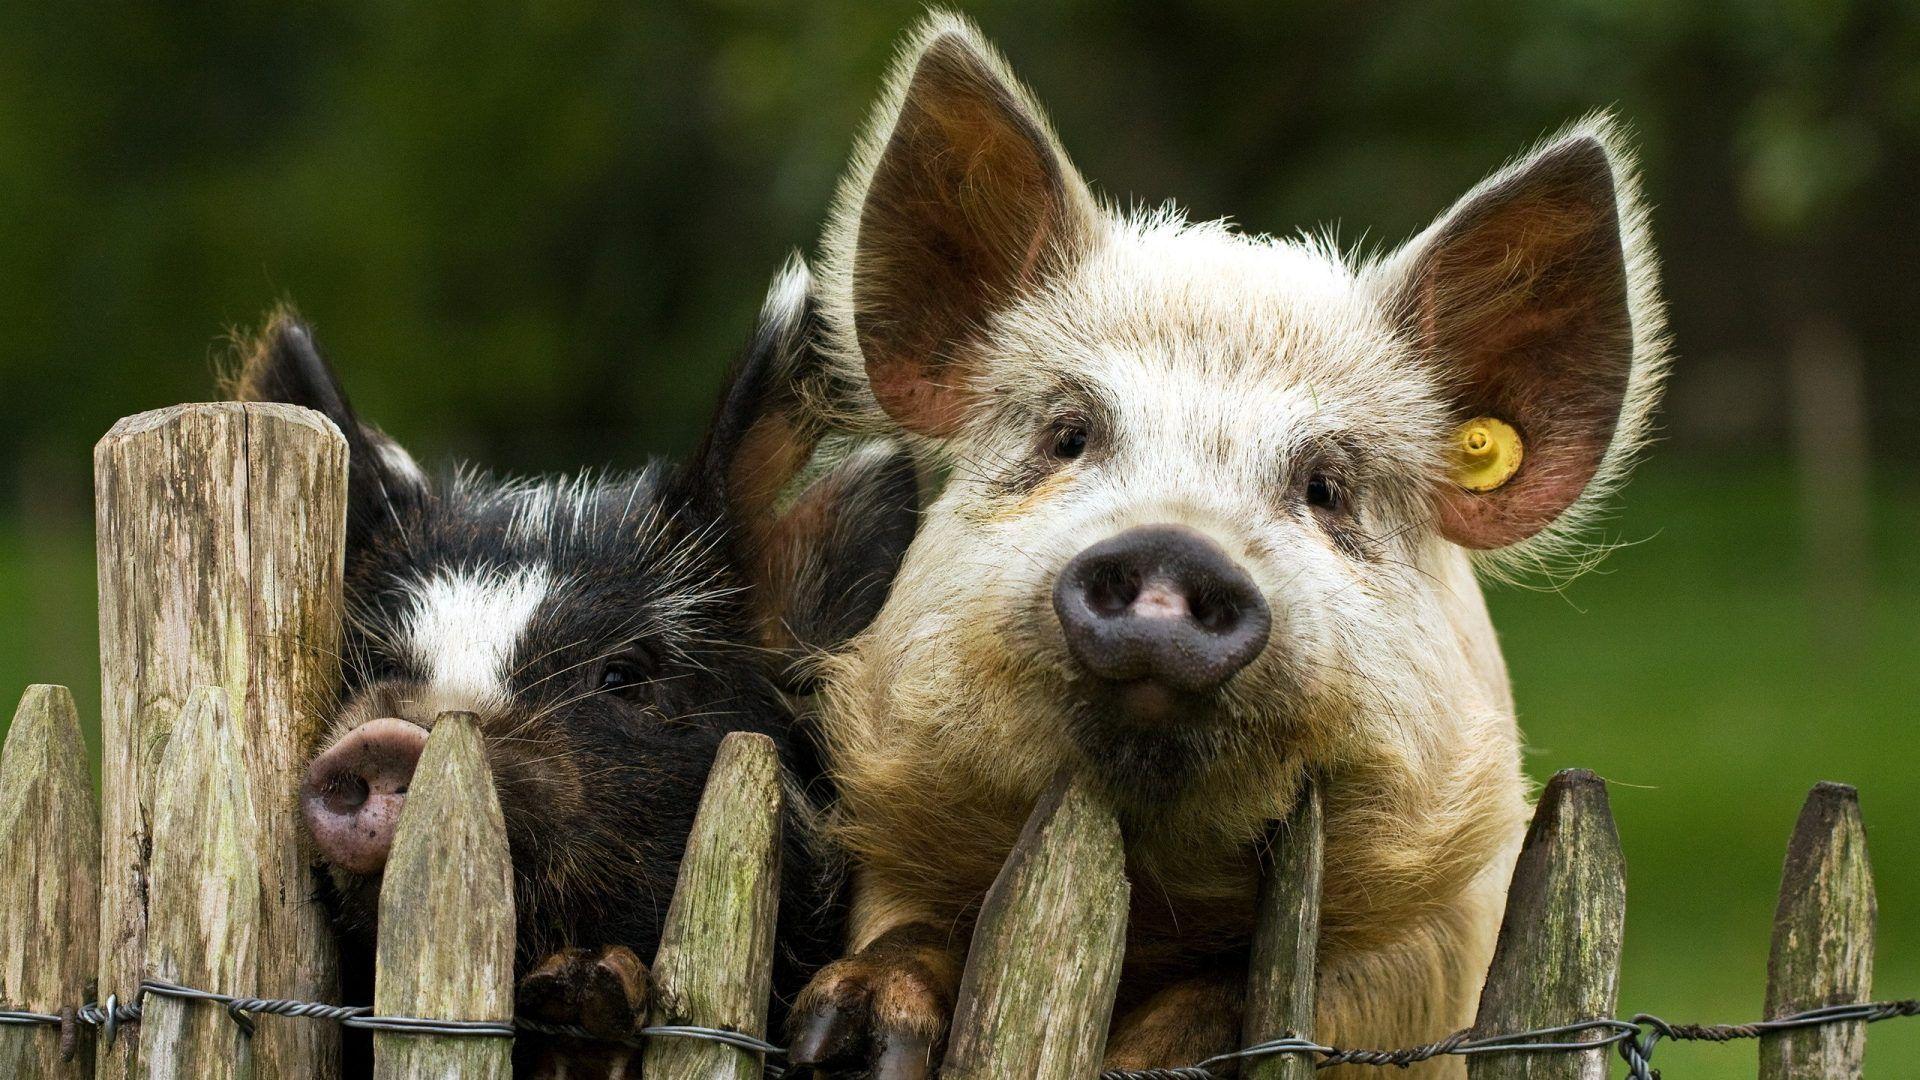 Pigs Tag wallpaper: Baby Wild Pigs Boars Image Photo Animal